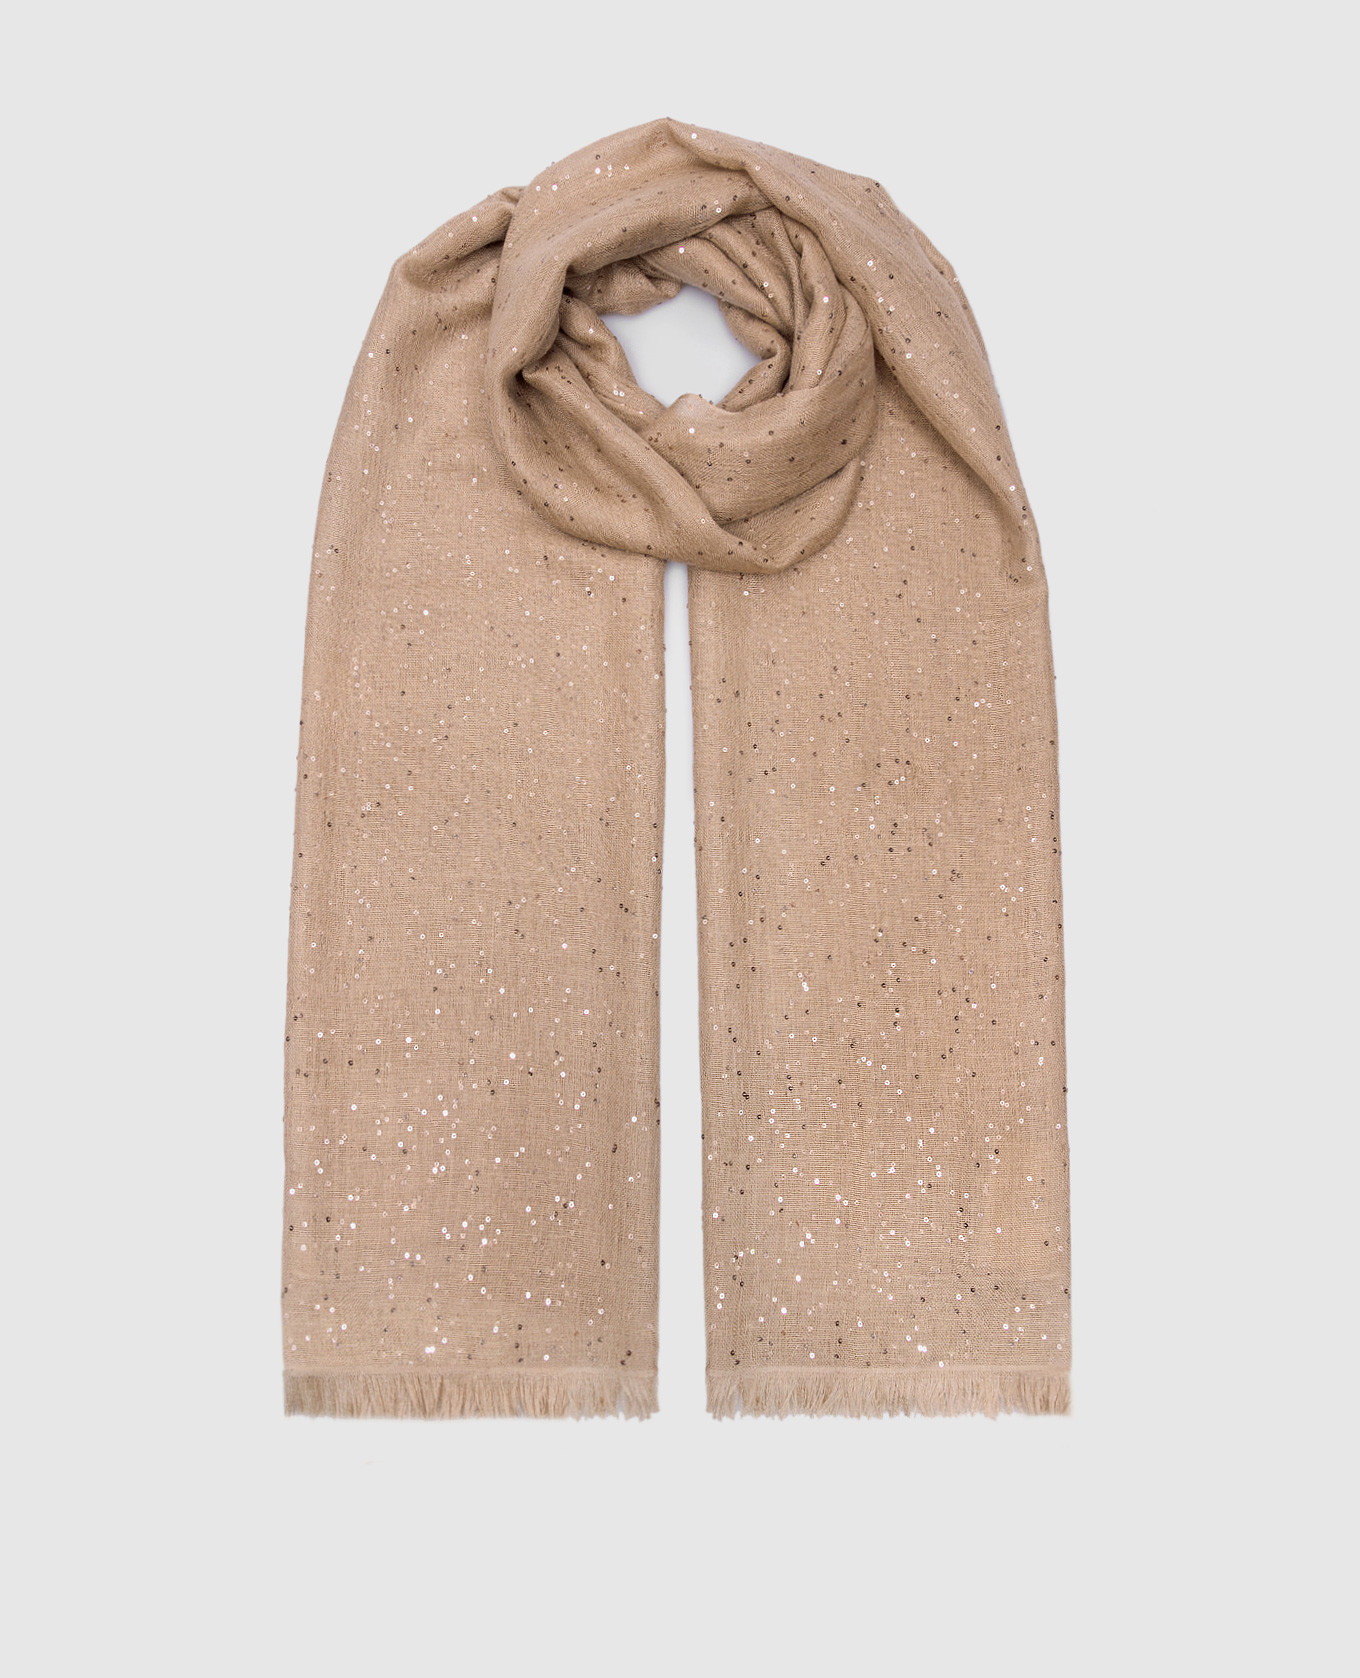 Beige stole made of cashmere and silk with sequins